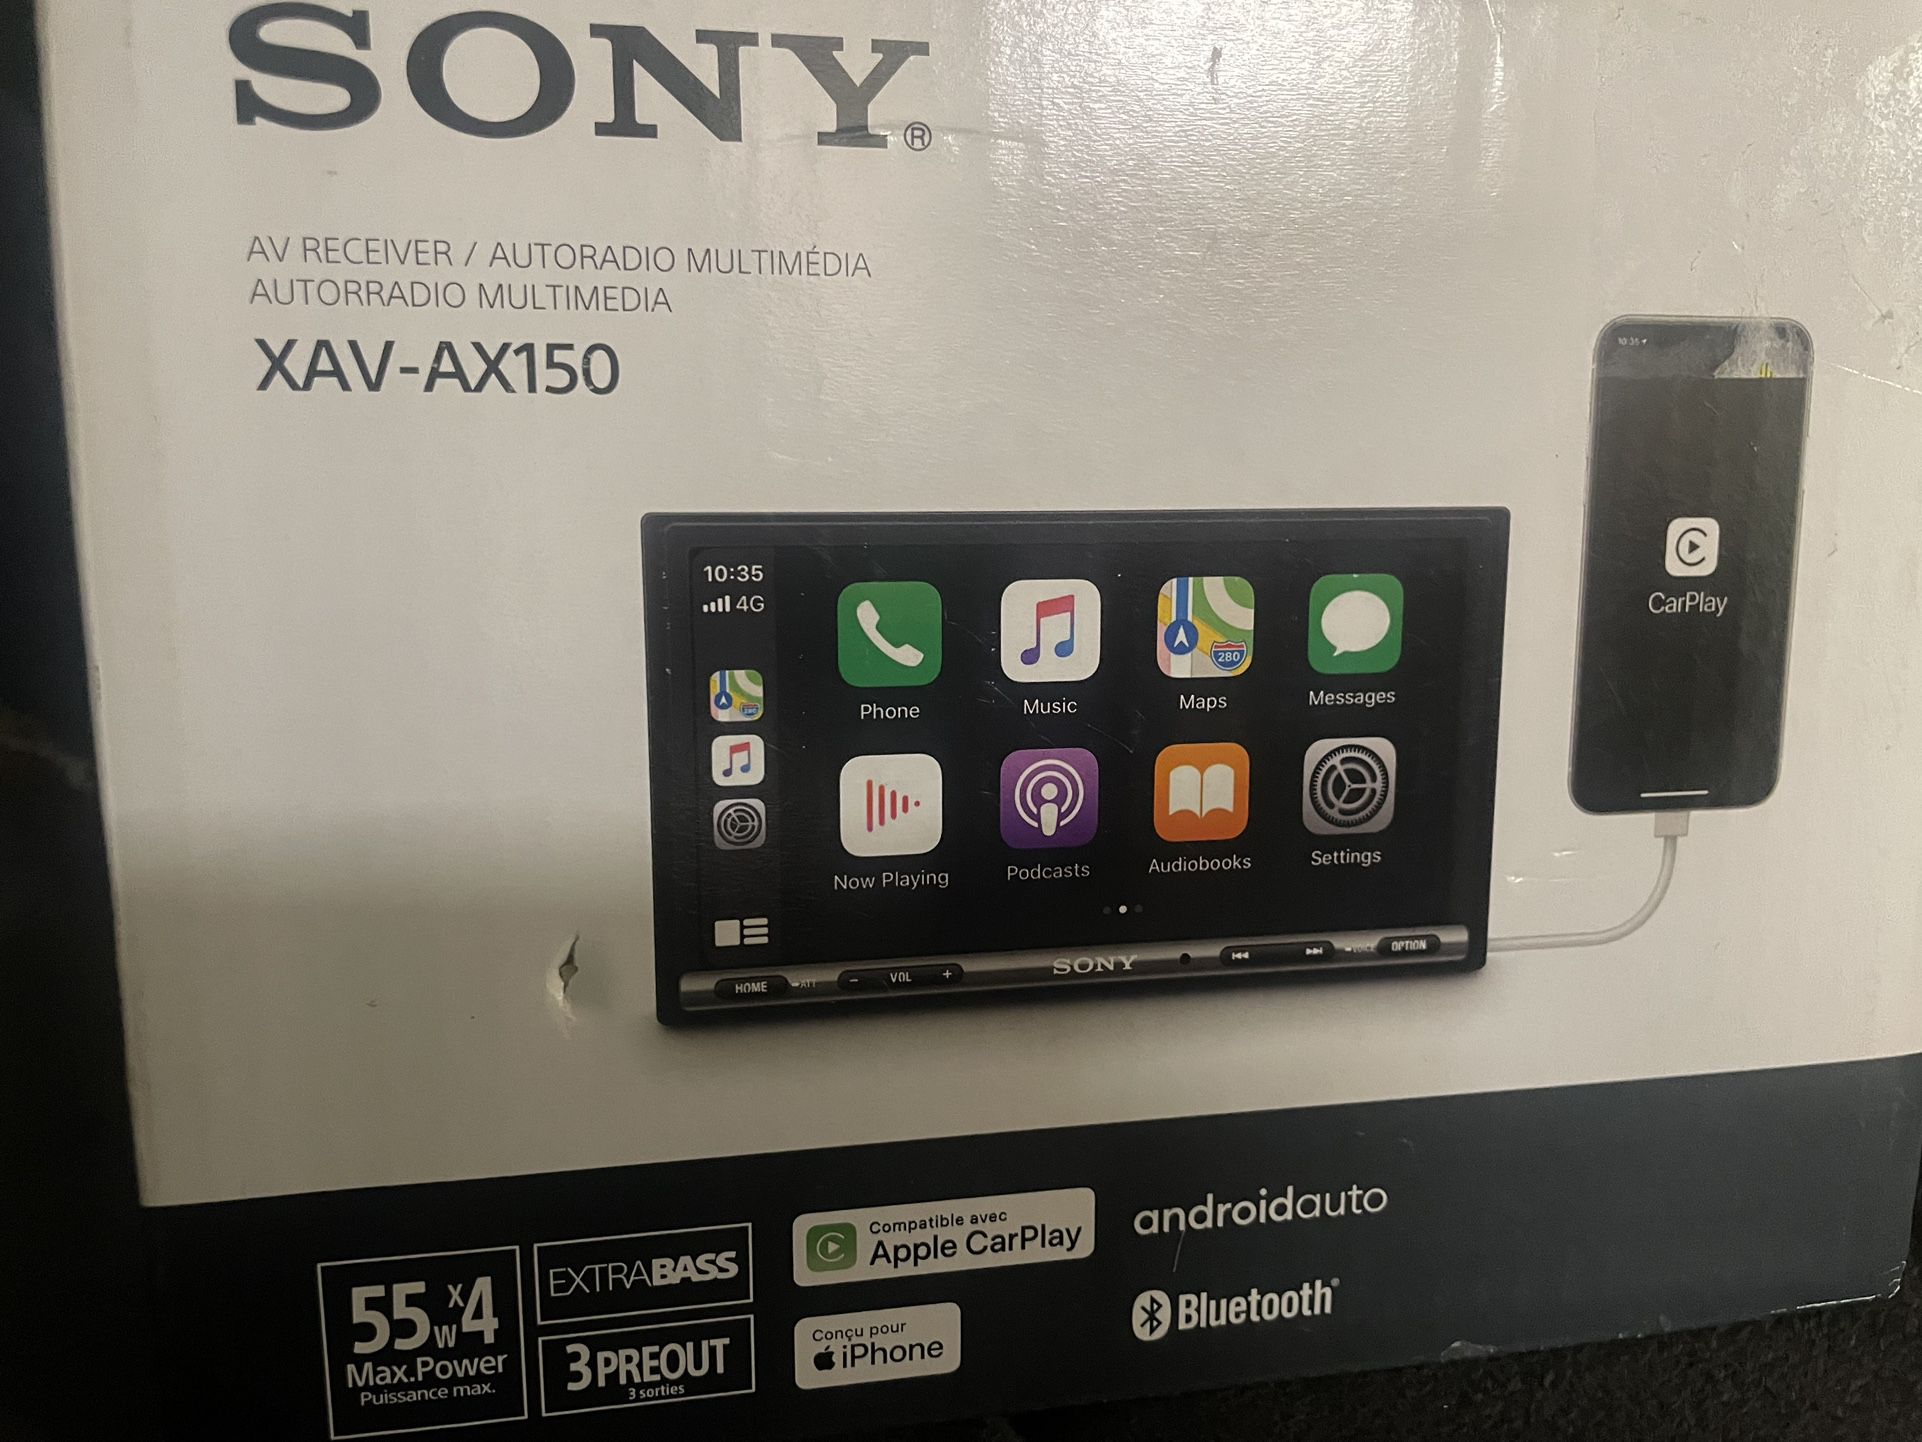 Sony XAV-AX150 - Apple CarPlay/Android Auto Digital Receiver - 7" High Resolution Touch Screen Display - Double-DIN In-Dash Unit - 55 Watts x 4